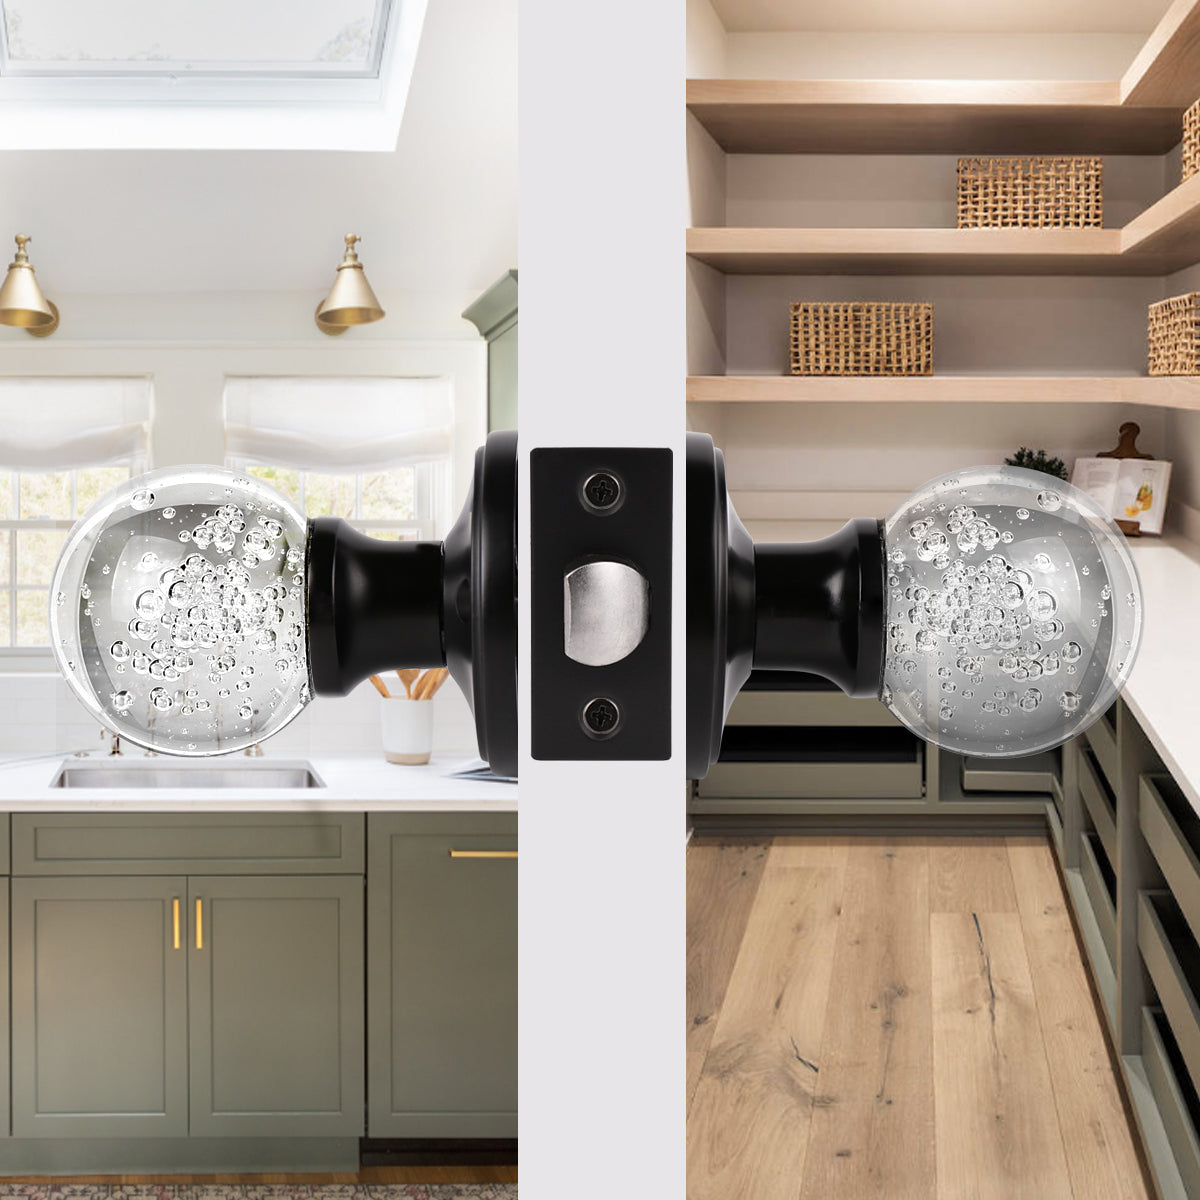 Crystal Glass Door Knobs in Round Ball Style, Passage/Privacy Knob, Black Finish DLC23BOBK - Probrico